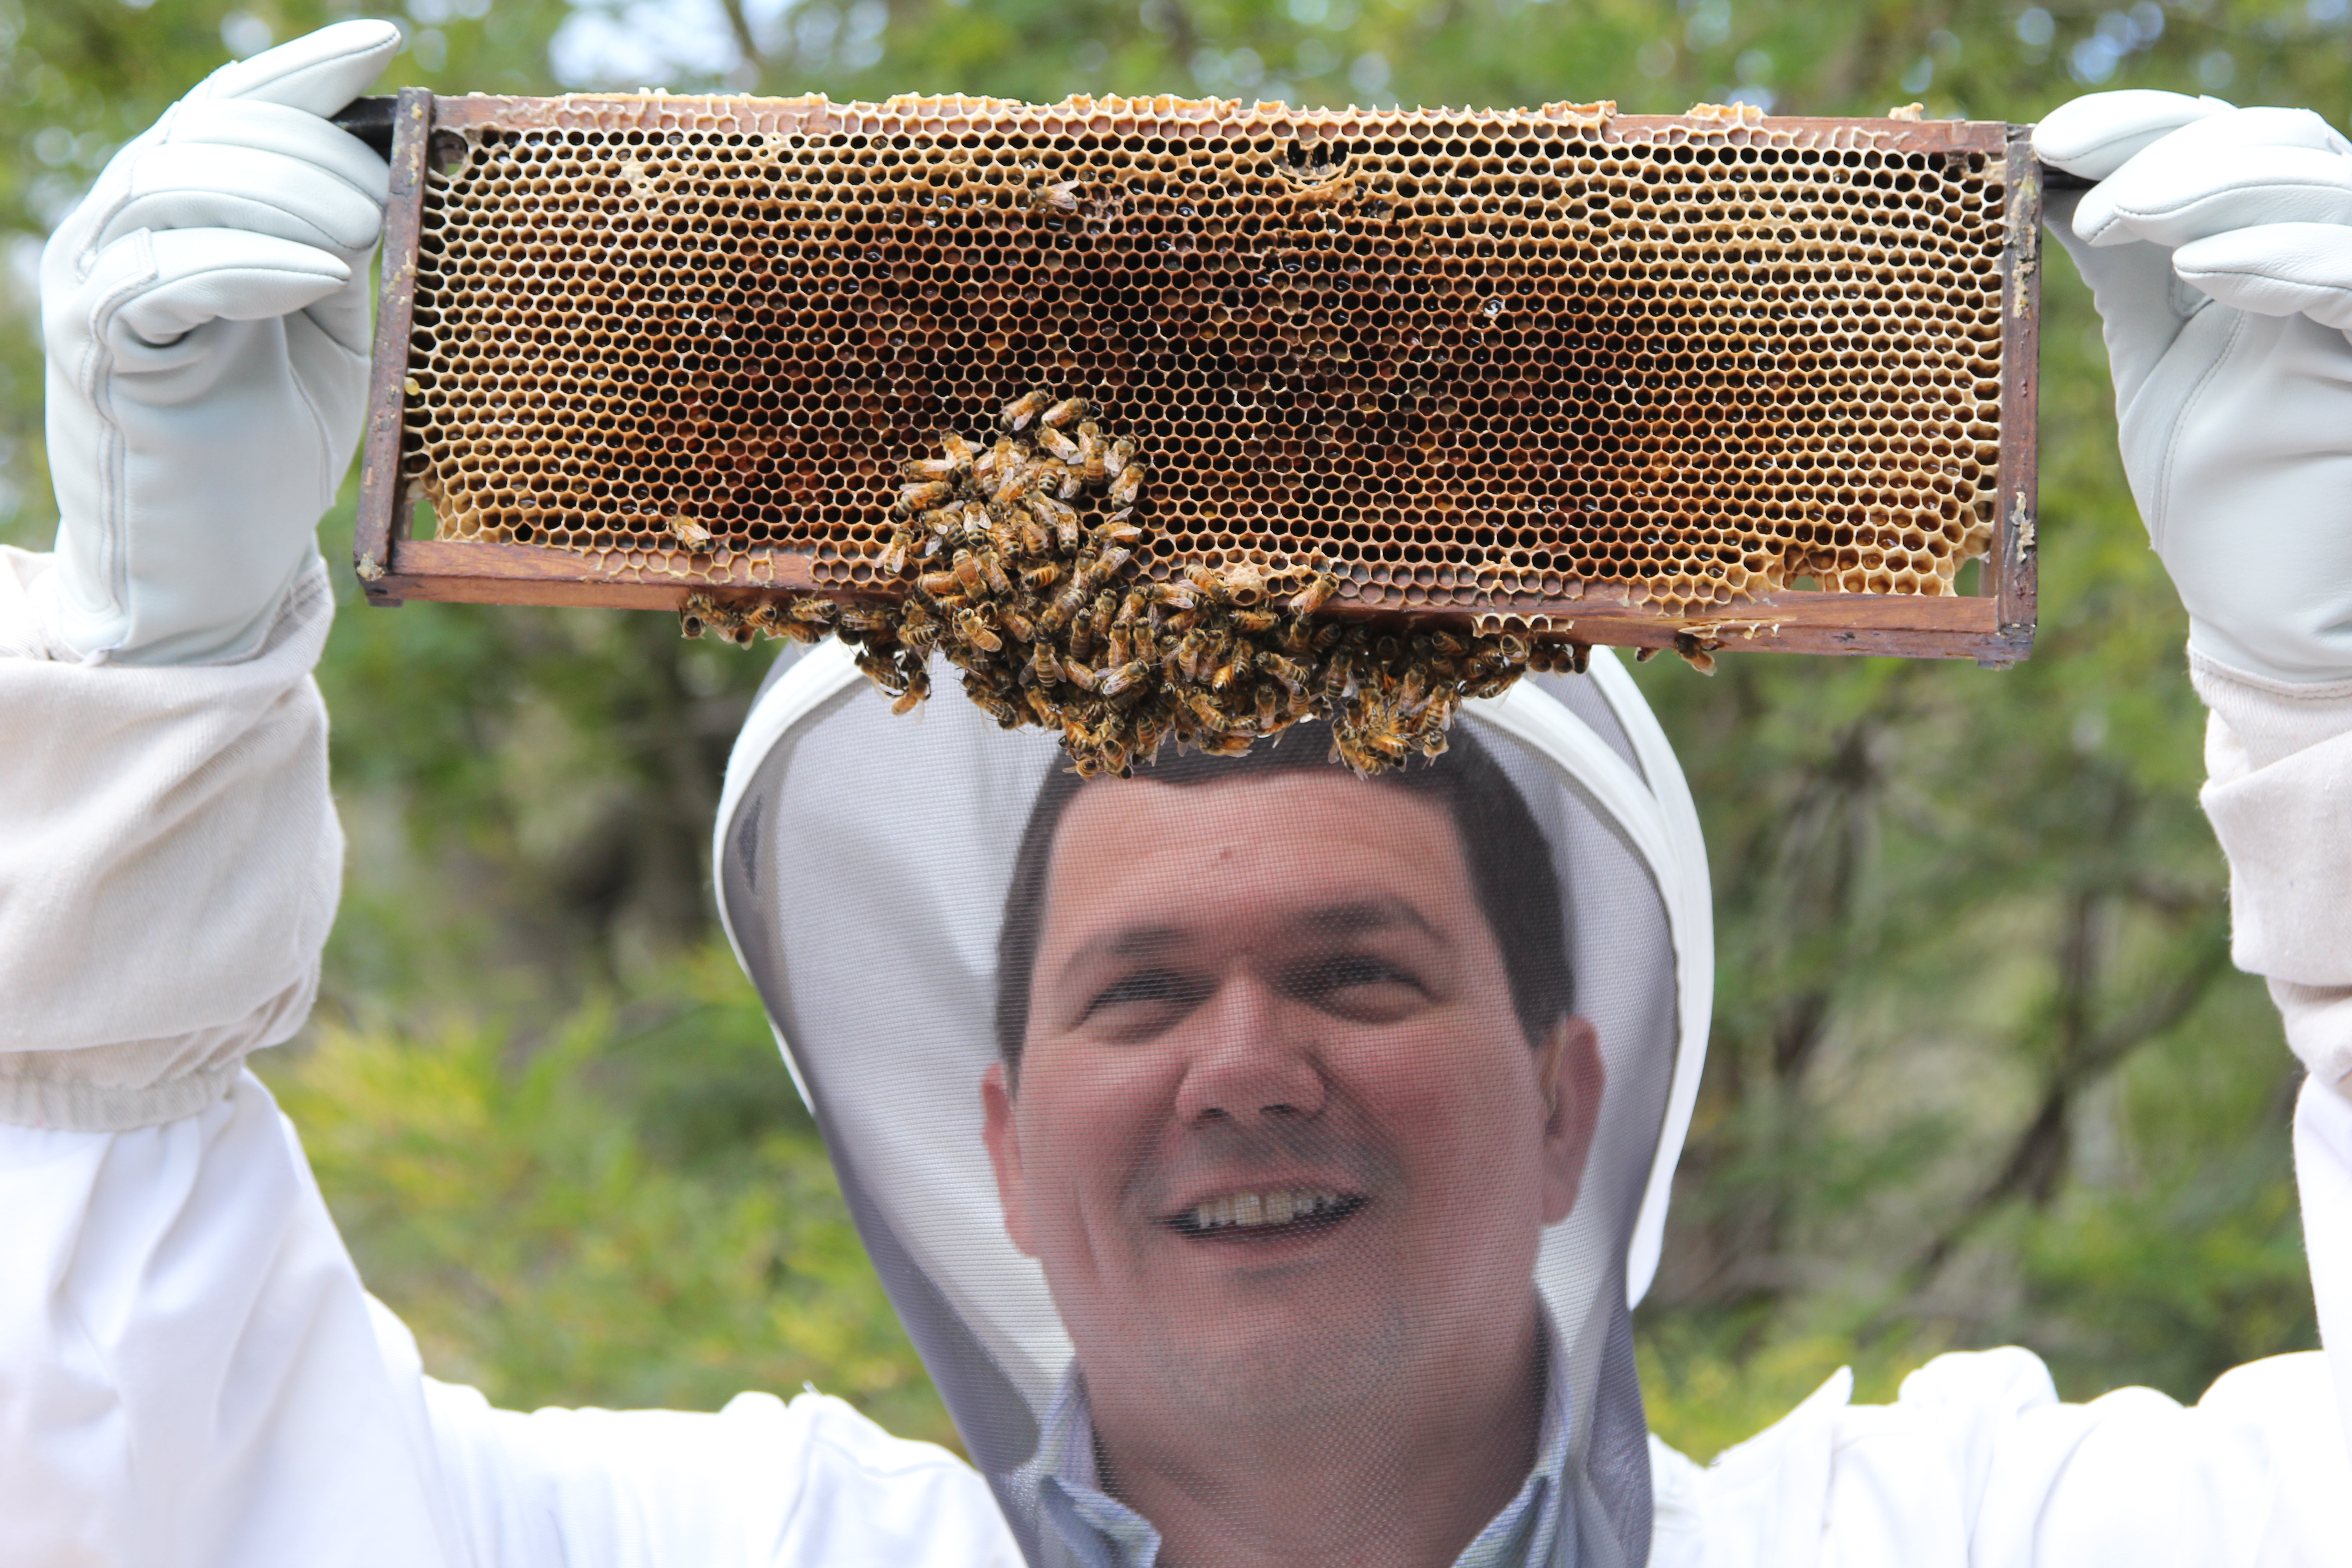 Man holding bee hive